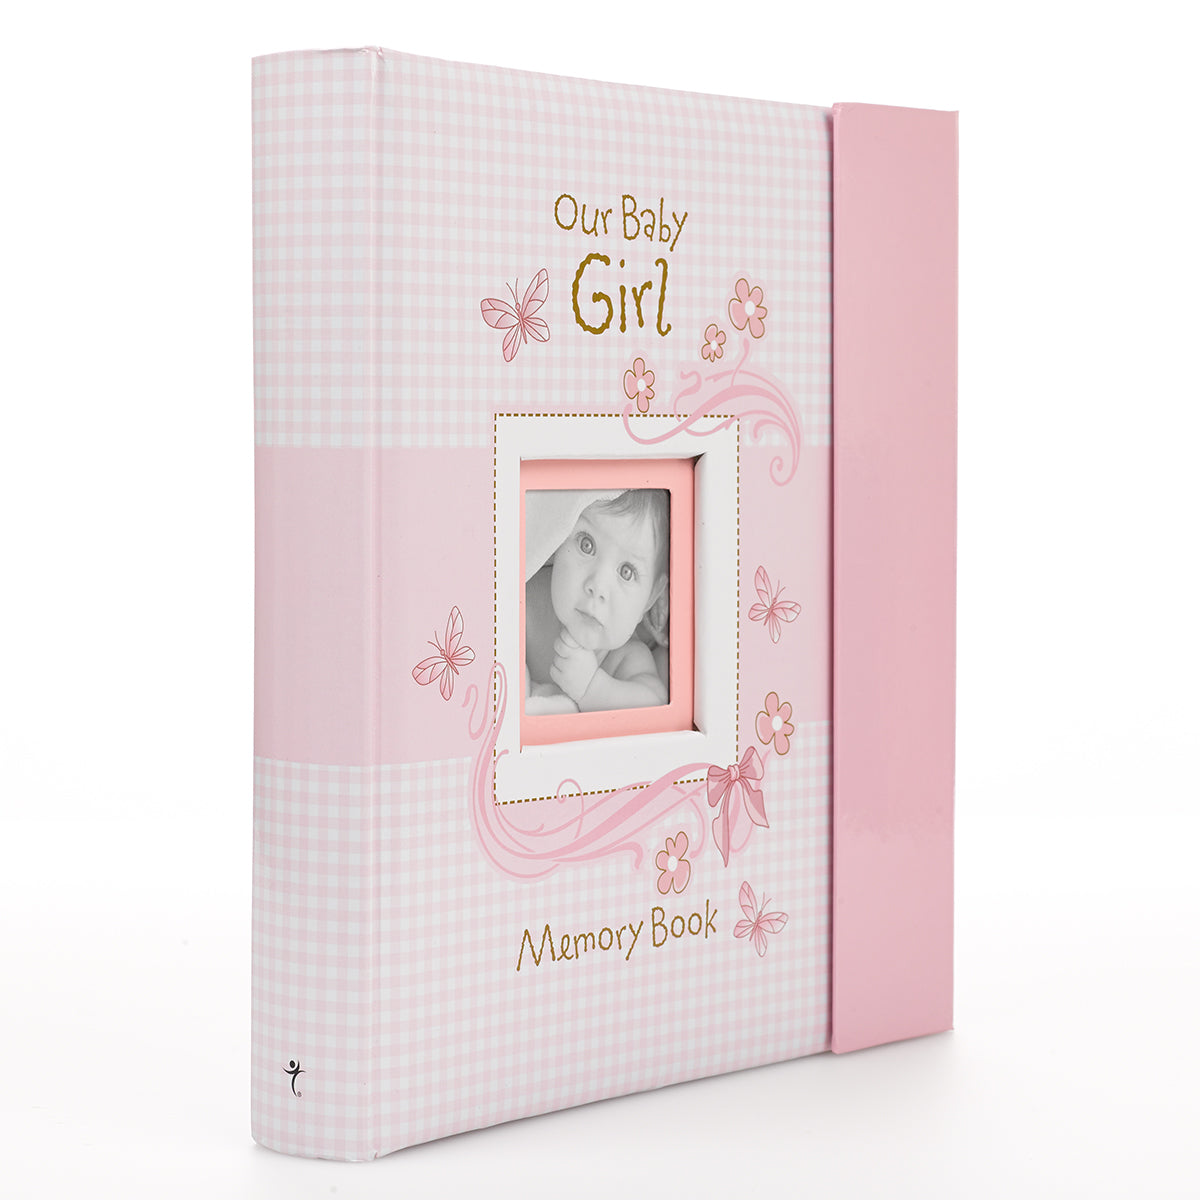 Our Baby Girl Memory Book - The Christian Gift Company